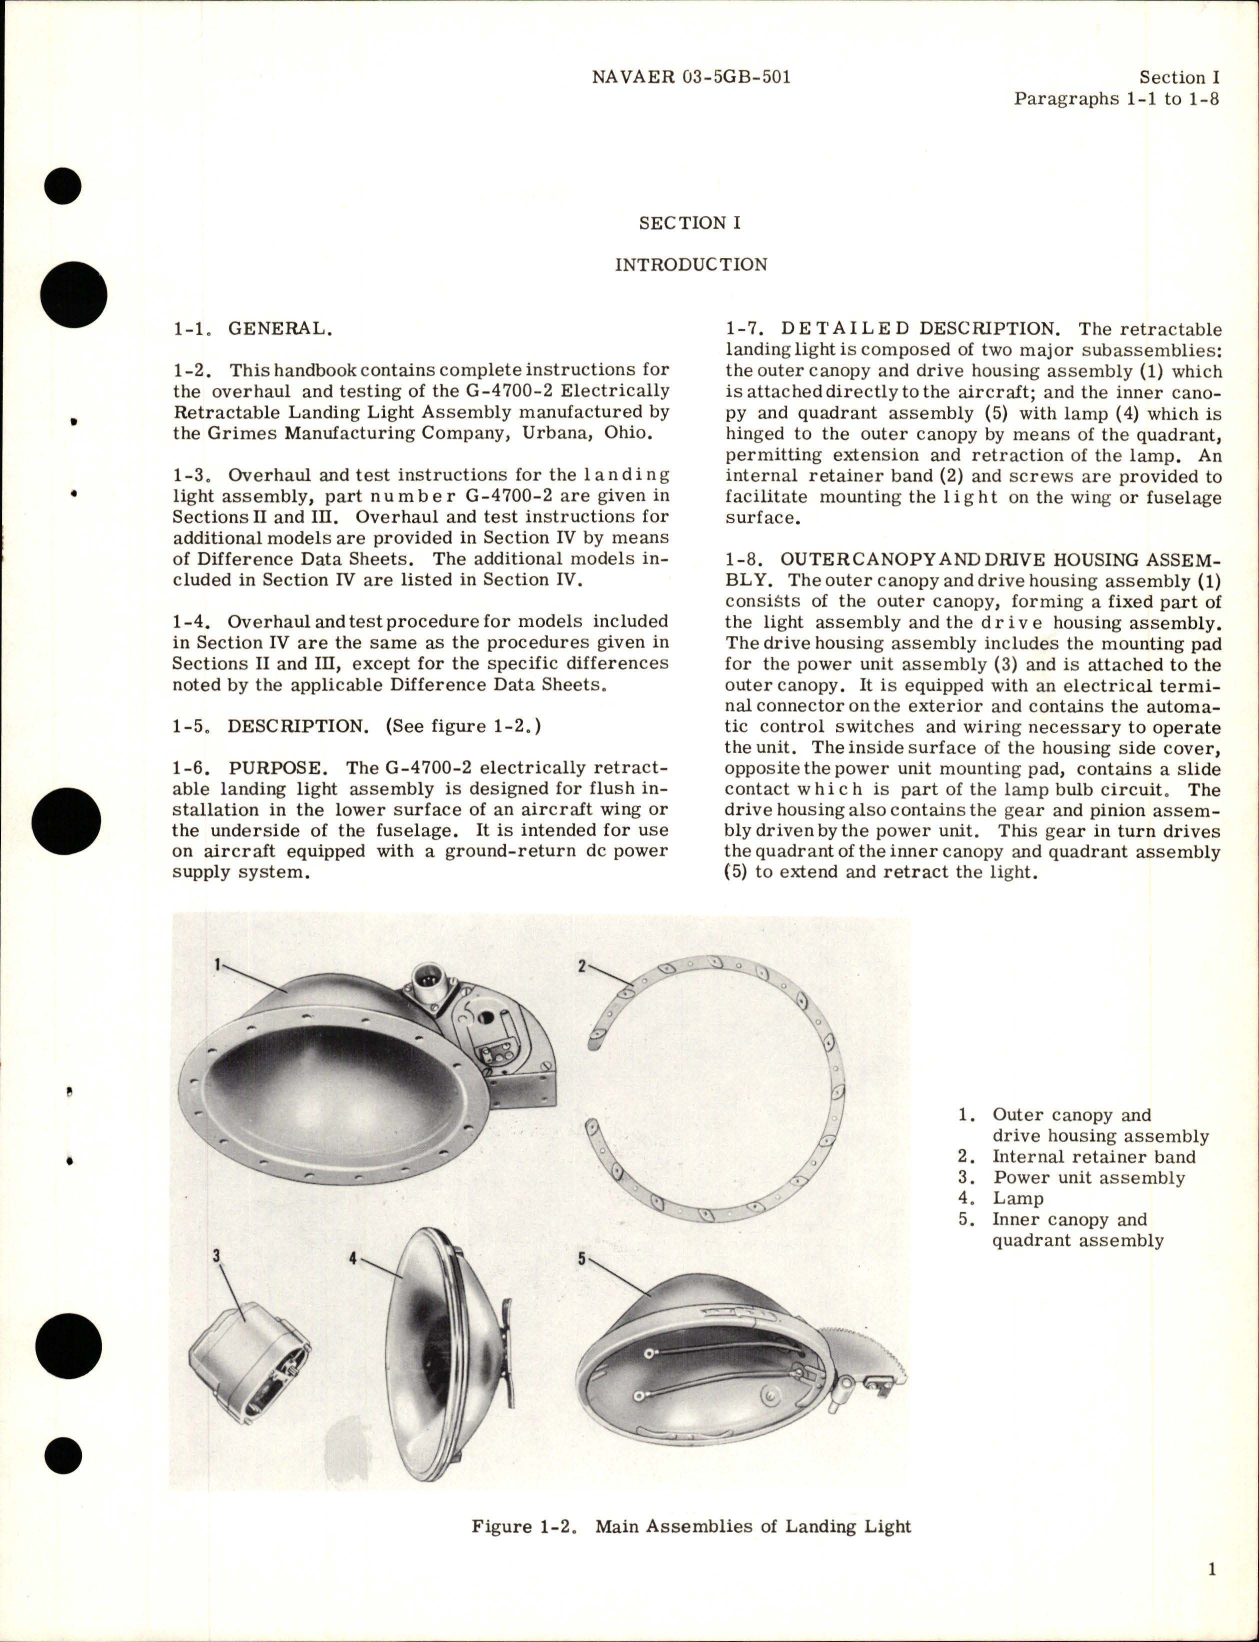 Sample page 5 from AirCorps Library document: Overhaul Instructions for Electrically Retractable Landing Lights - Parts G-4700-2, G-4700-3, G-4700-5, and G-4700-6